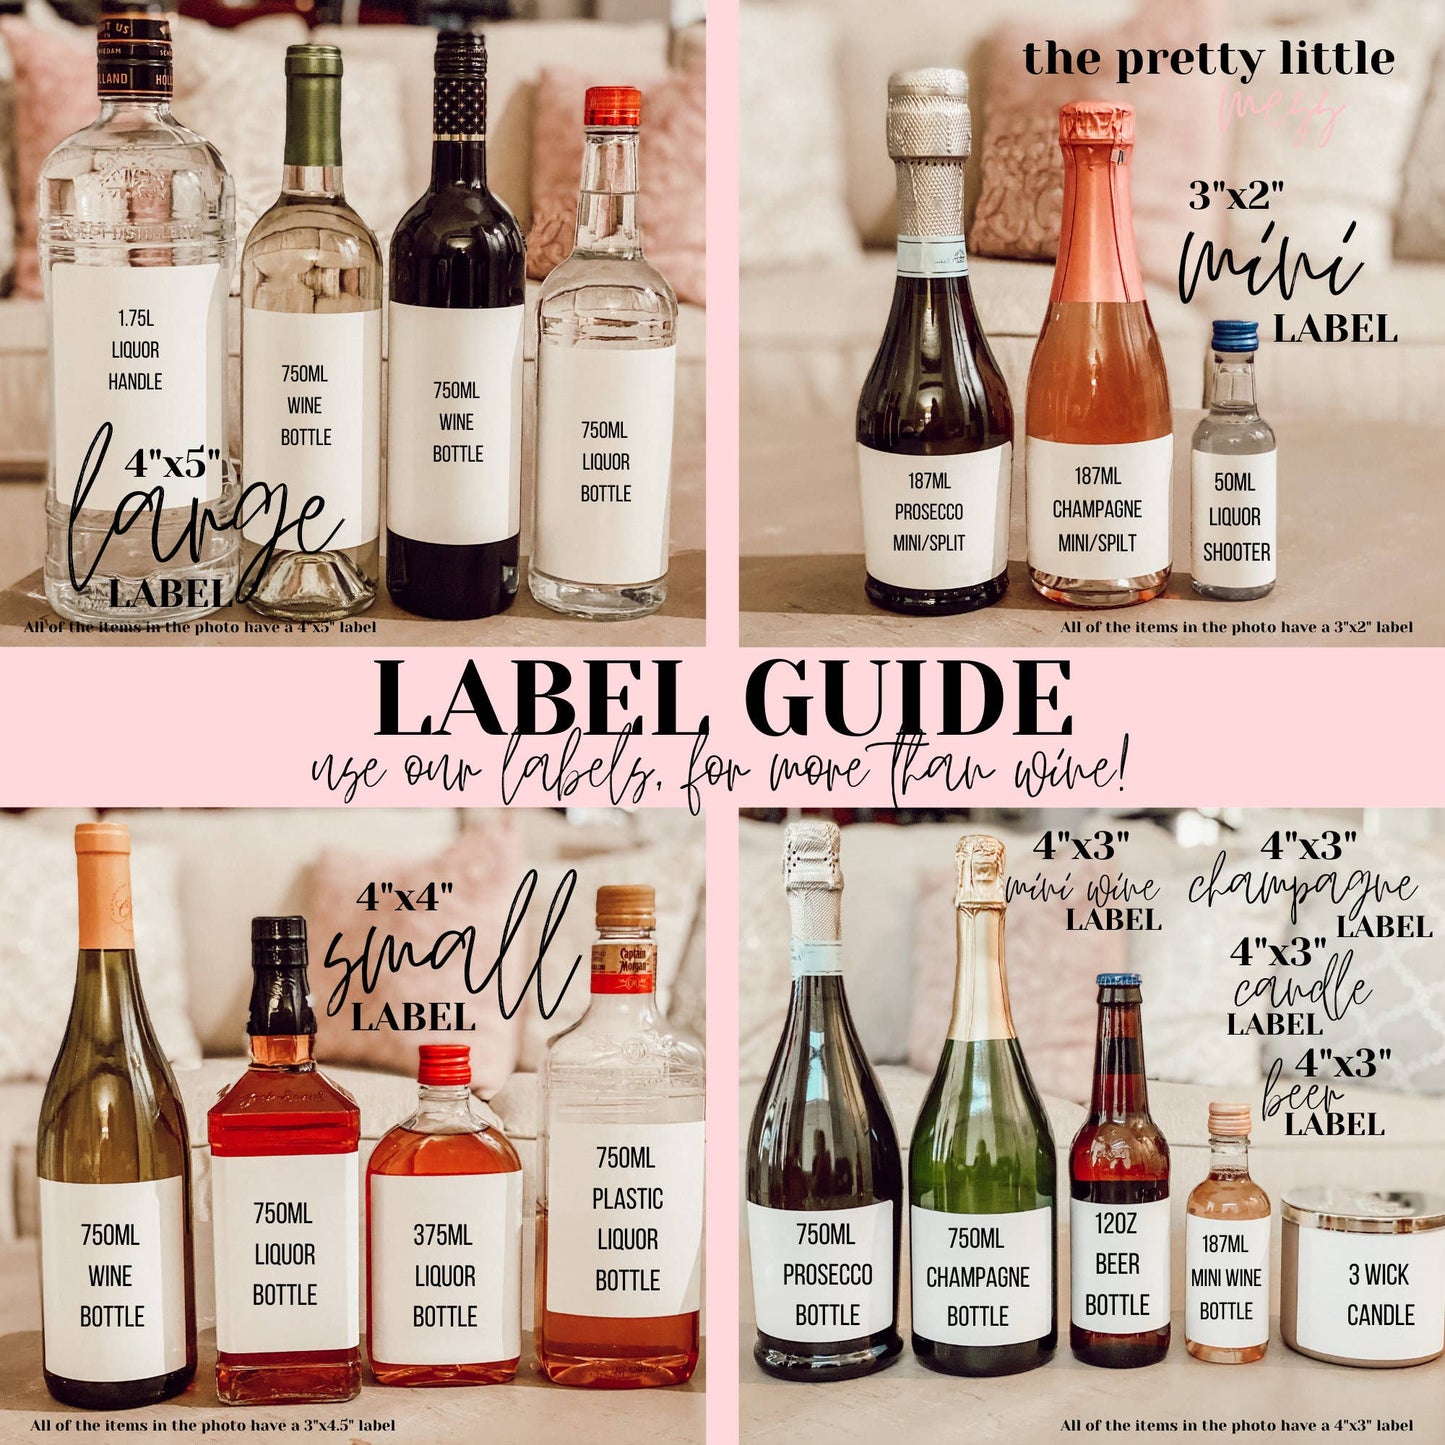 Bottle Labels: "Our Child Might Be the Reason You Drink" (Multiple Sizes)